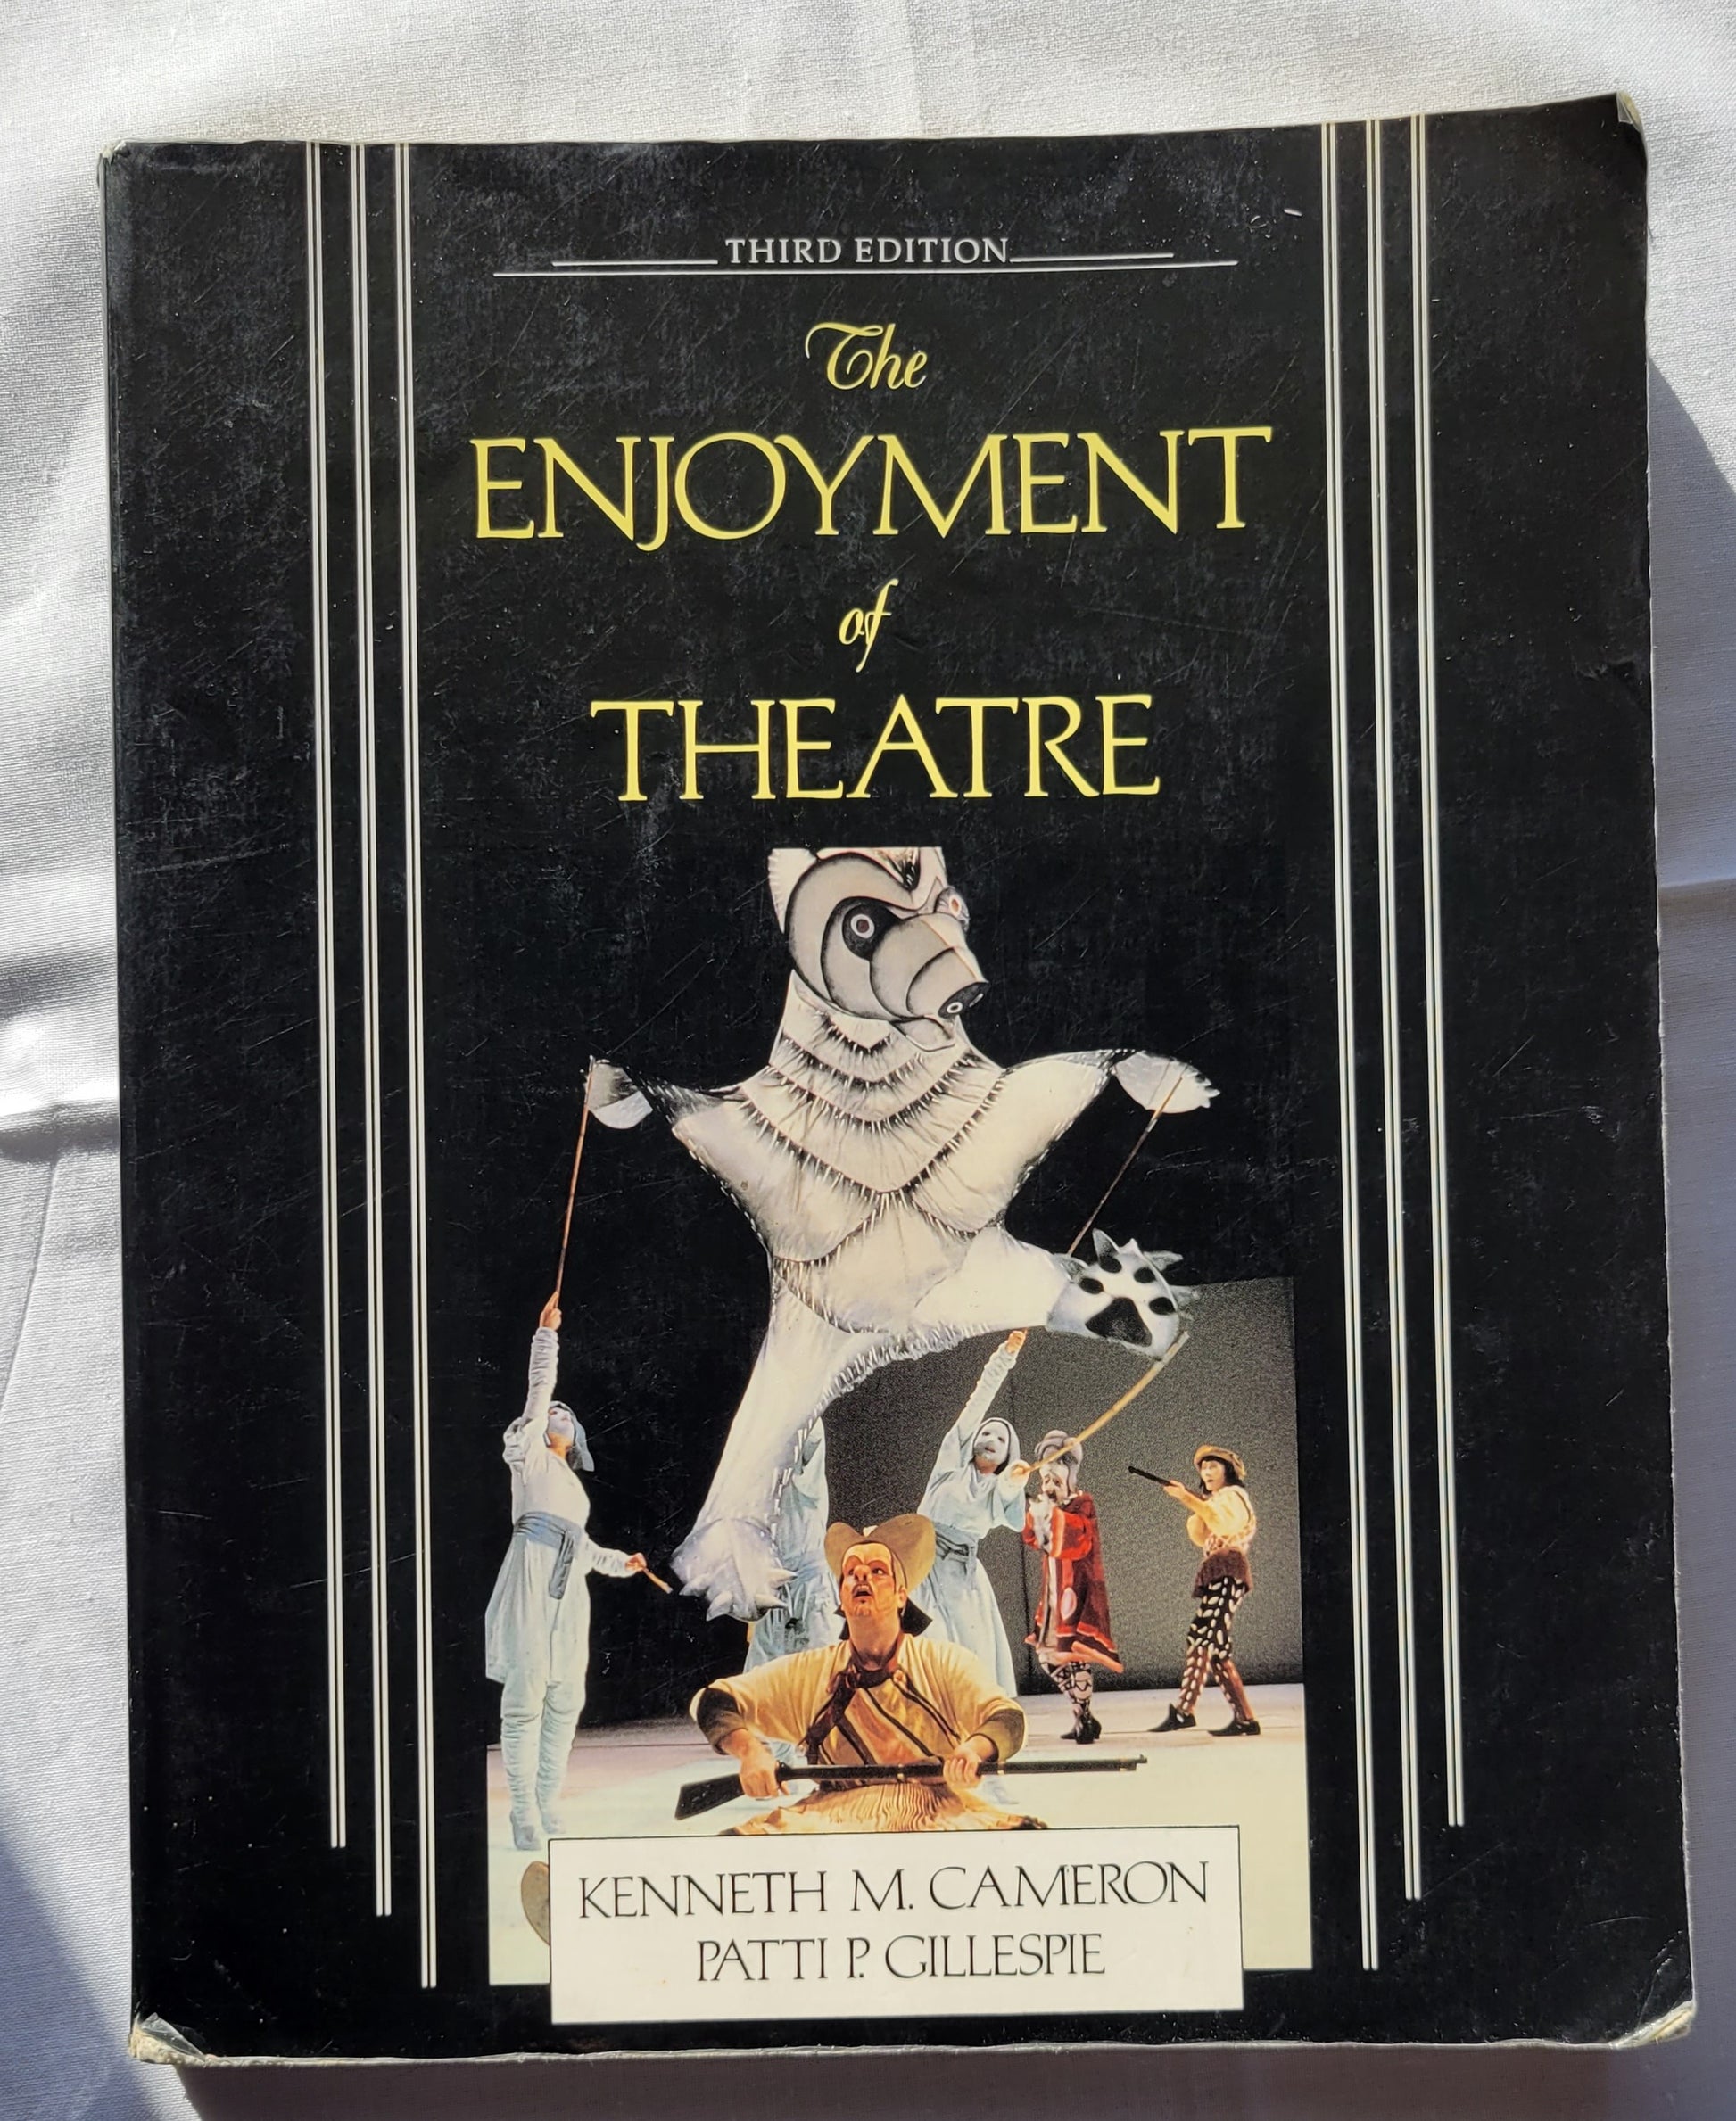 Used book for sale "The Enjoyment of Theatre: Third Edition" by Kenneth M. Cameron and Patti P. Gillespie, published by Maxwell Macmillan International in 1992. Front cover.